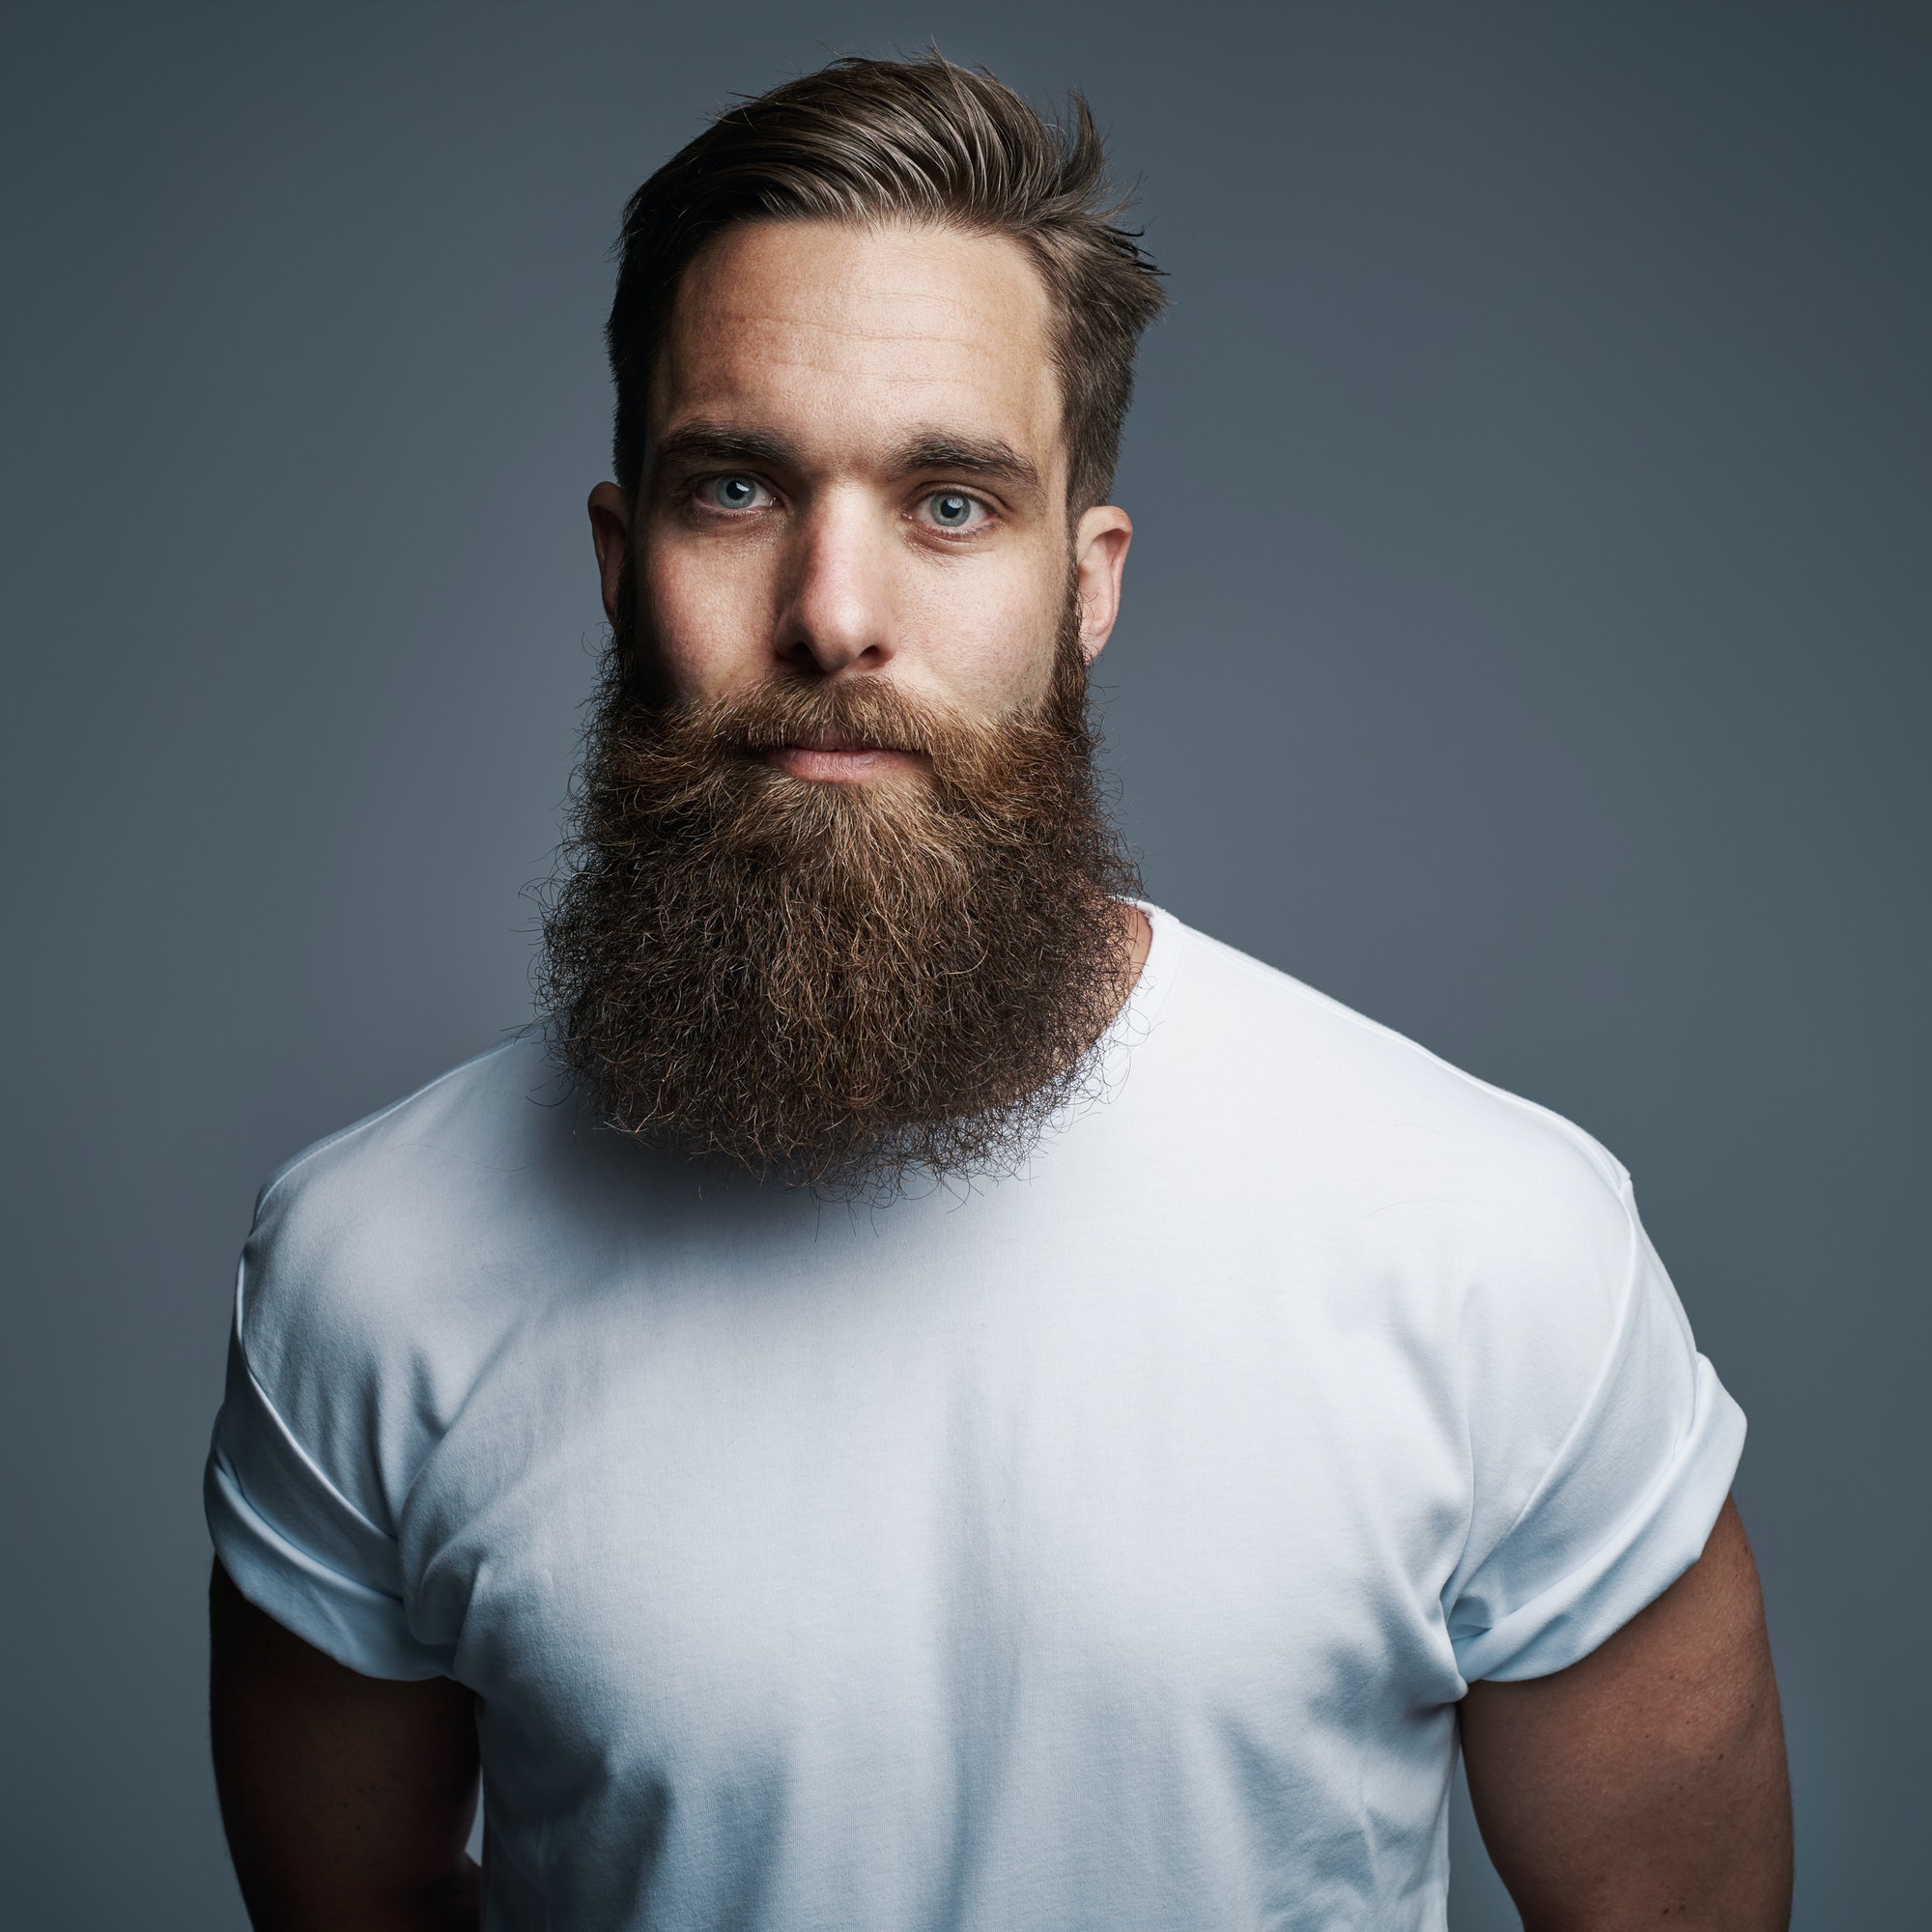 serious-young-muscular-man-with-large-fuzzy-beard.jpg